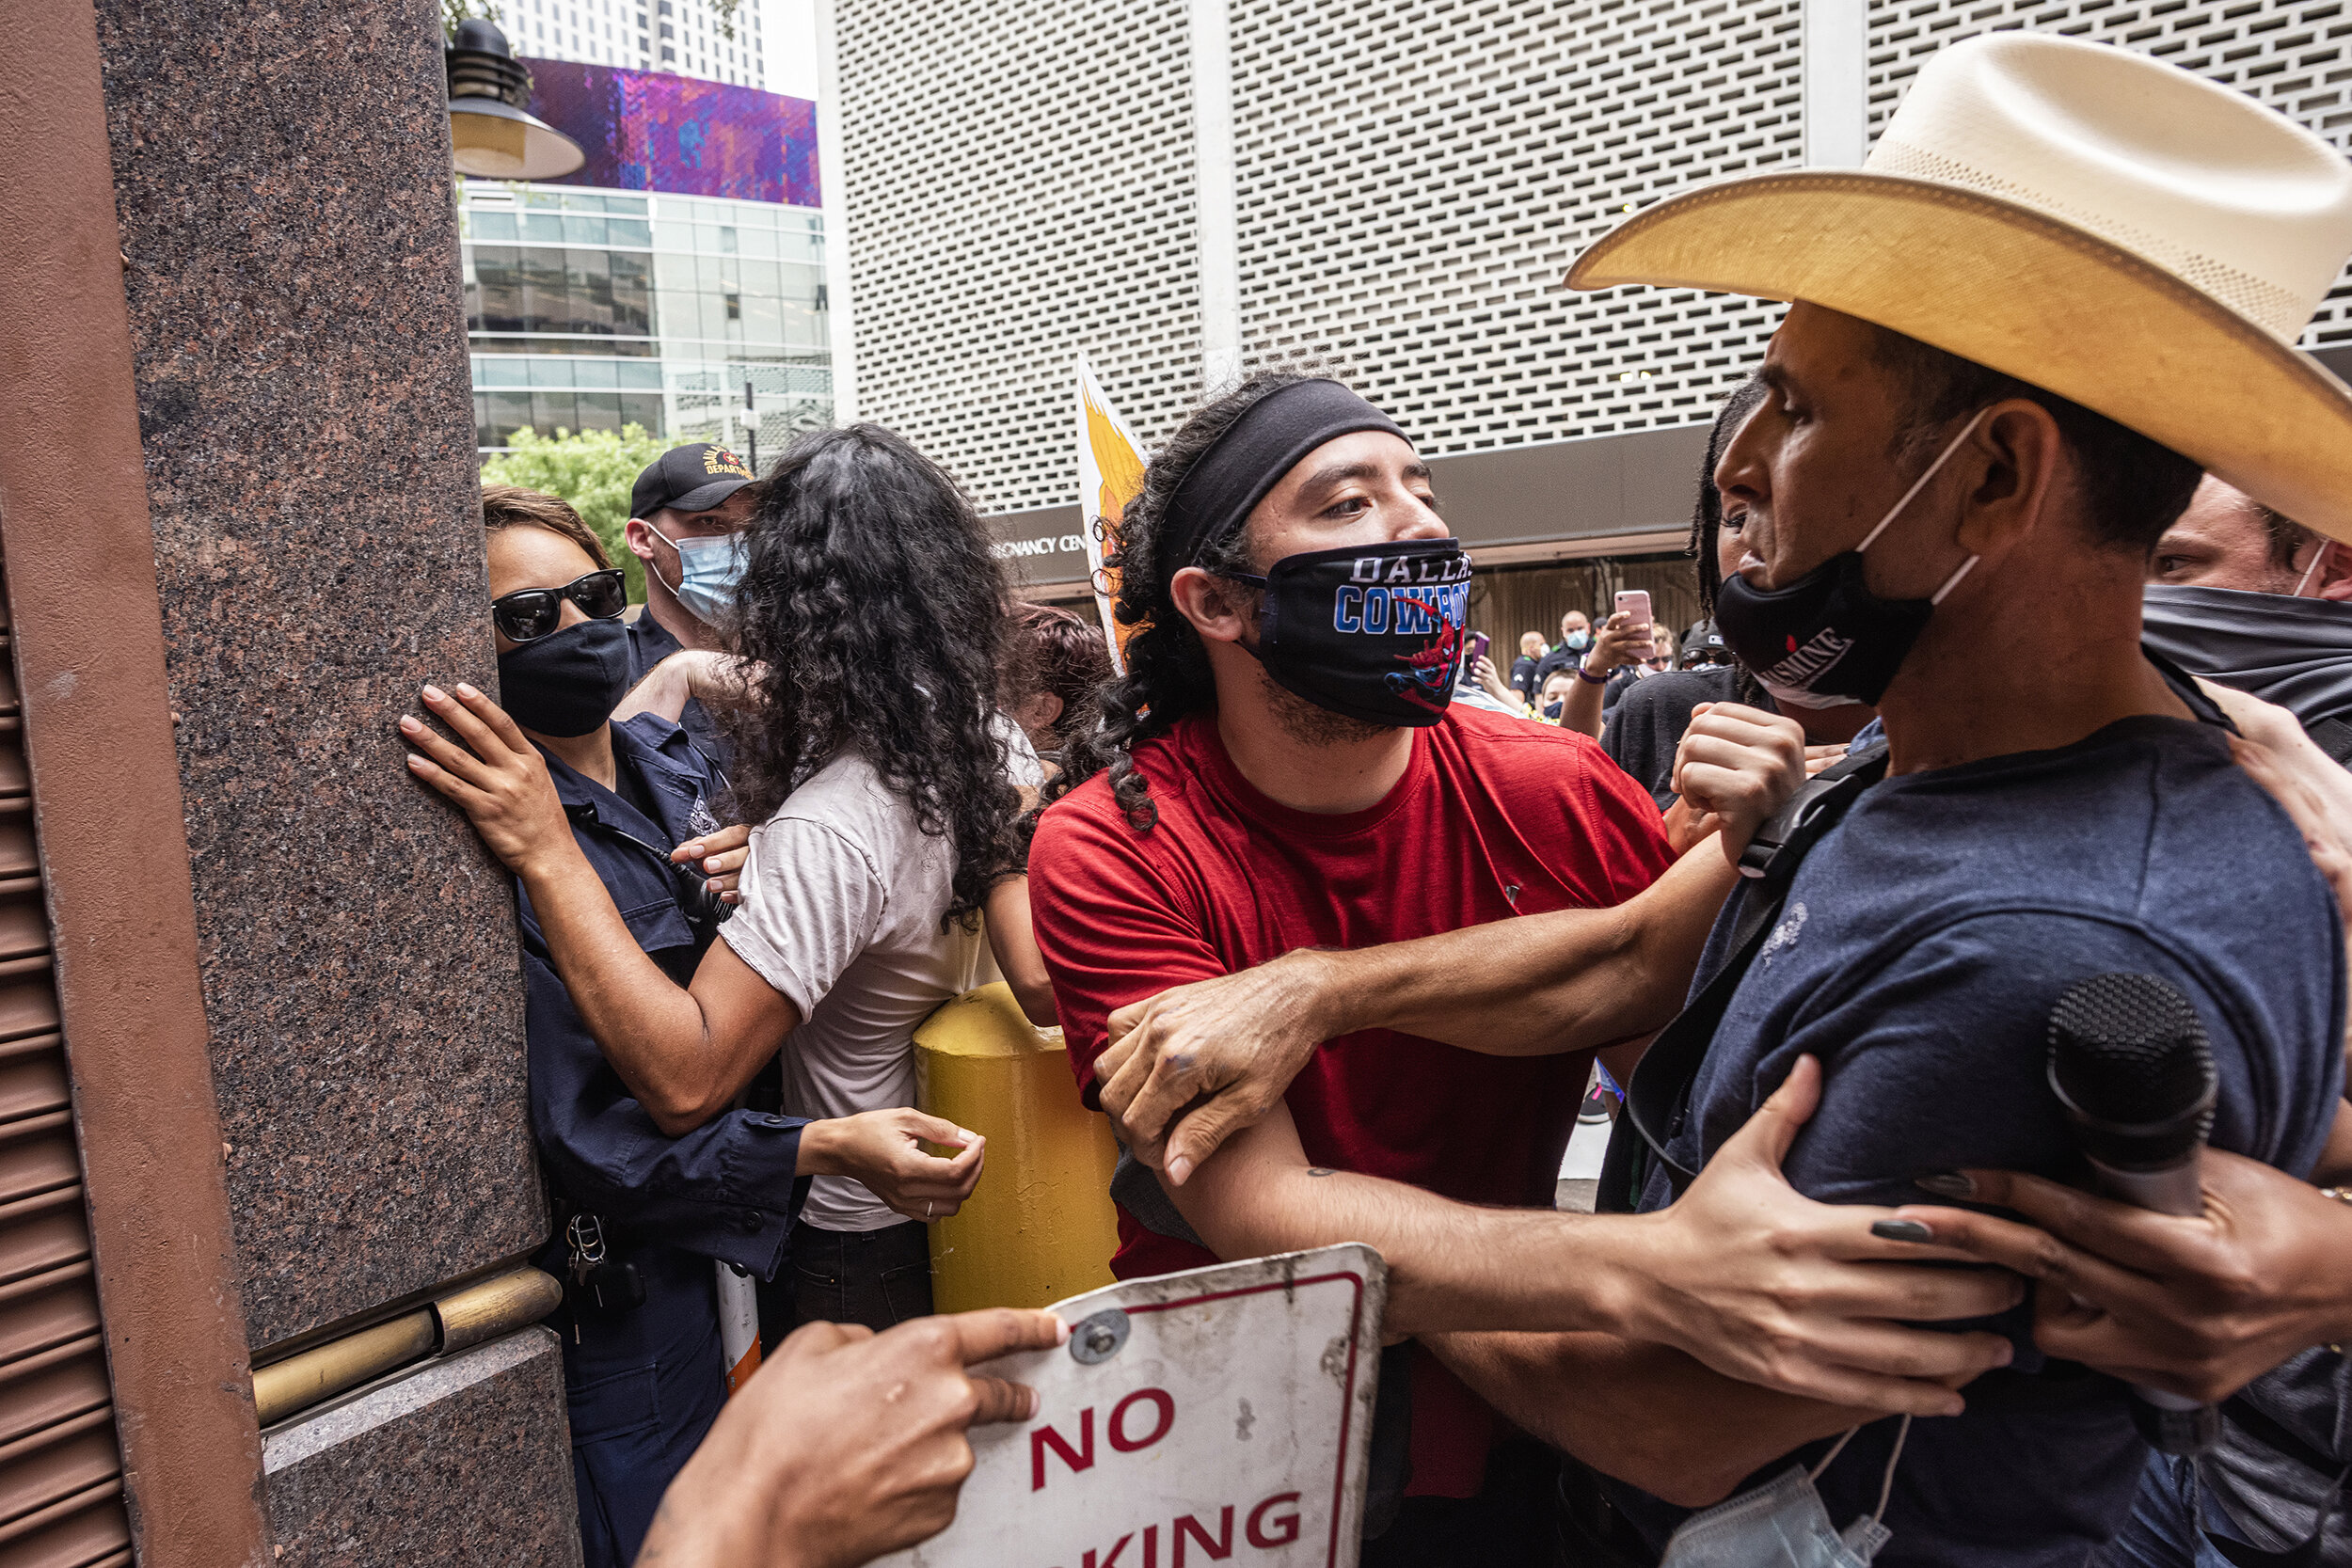  Protesters intervene when a scuffle erupts between a protester and a Dallas police officer at the Coming Out for Pence protest in downtown Dallas on June 28, 2020.  Groups including LGBTQ advocates protested a visit by Vice President Mike Pence to n